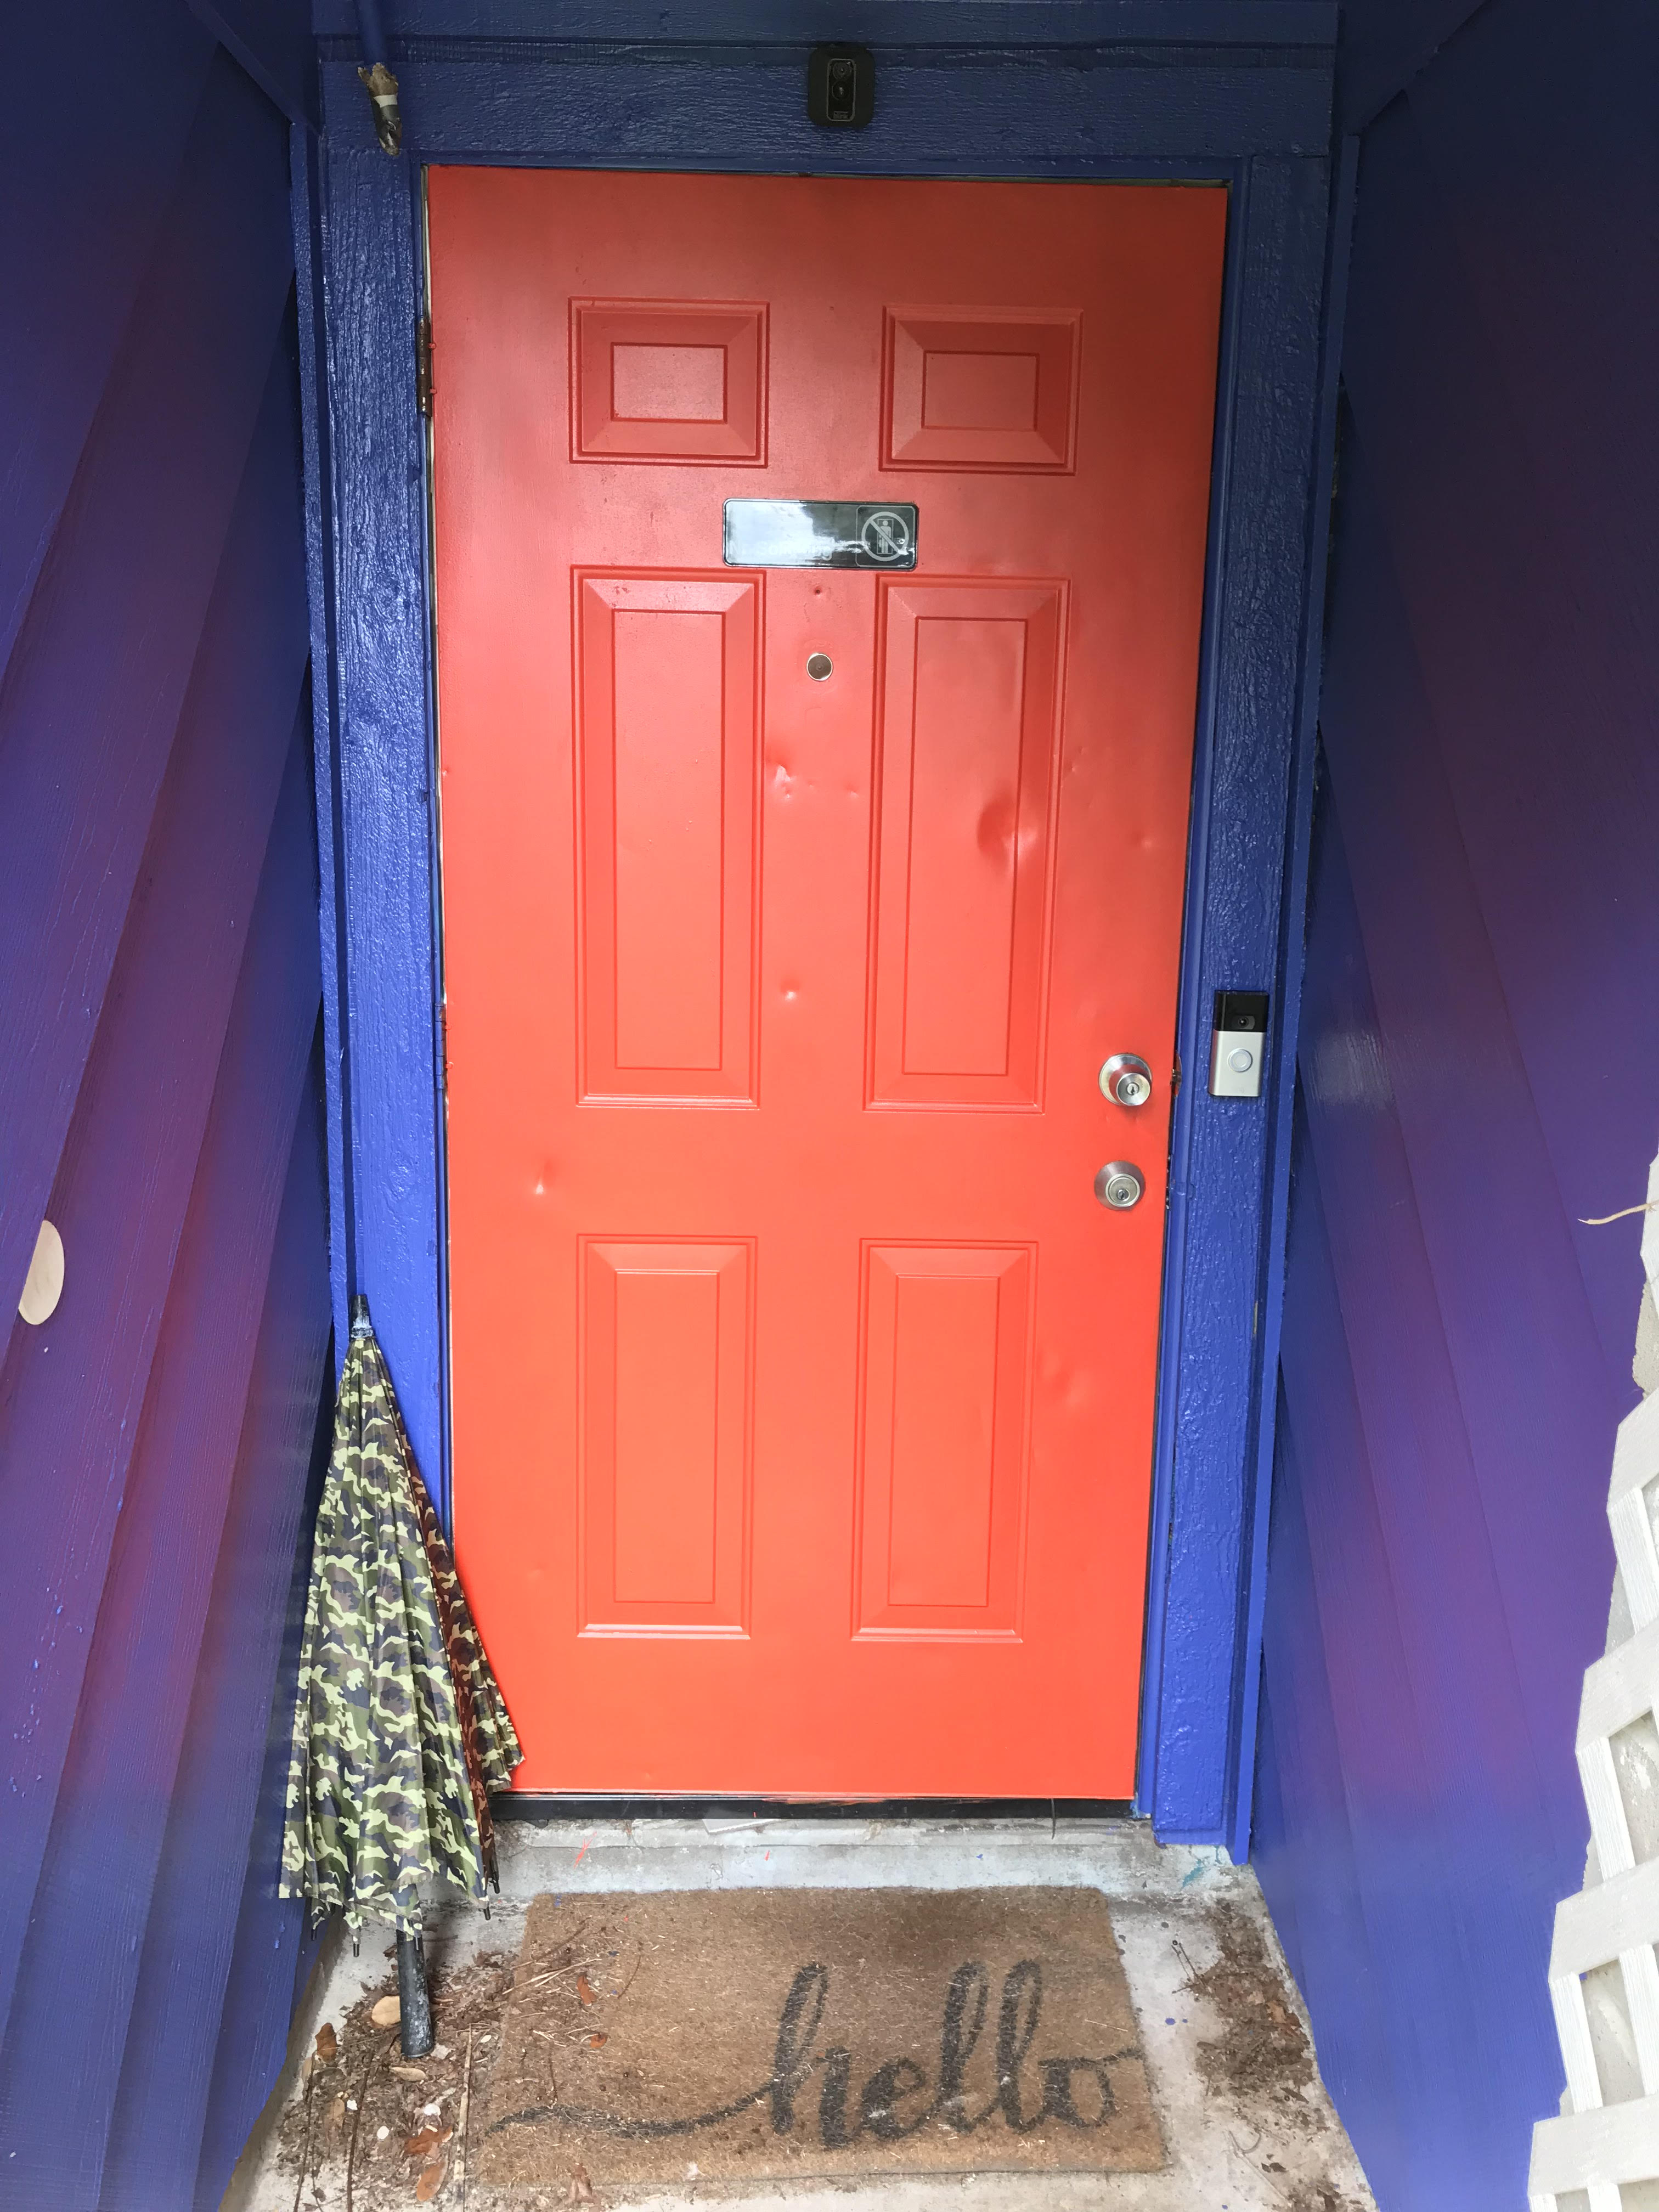 An entry door painted tomato red